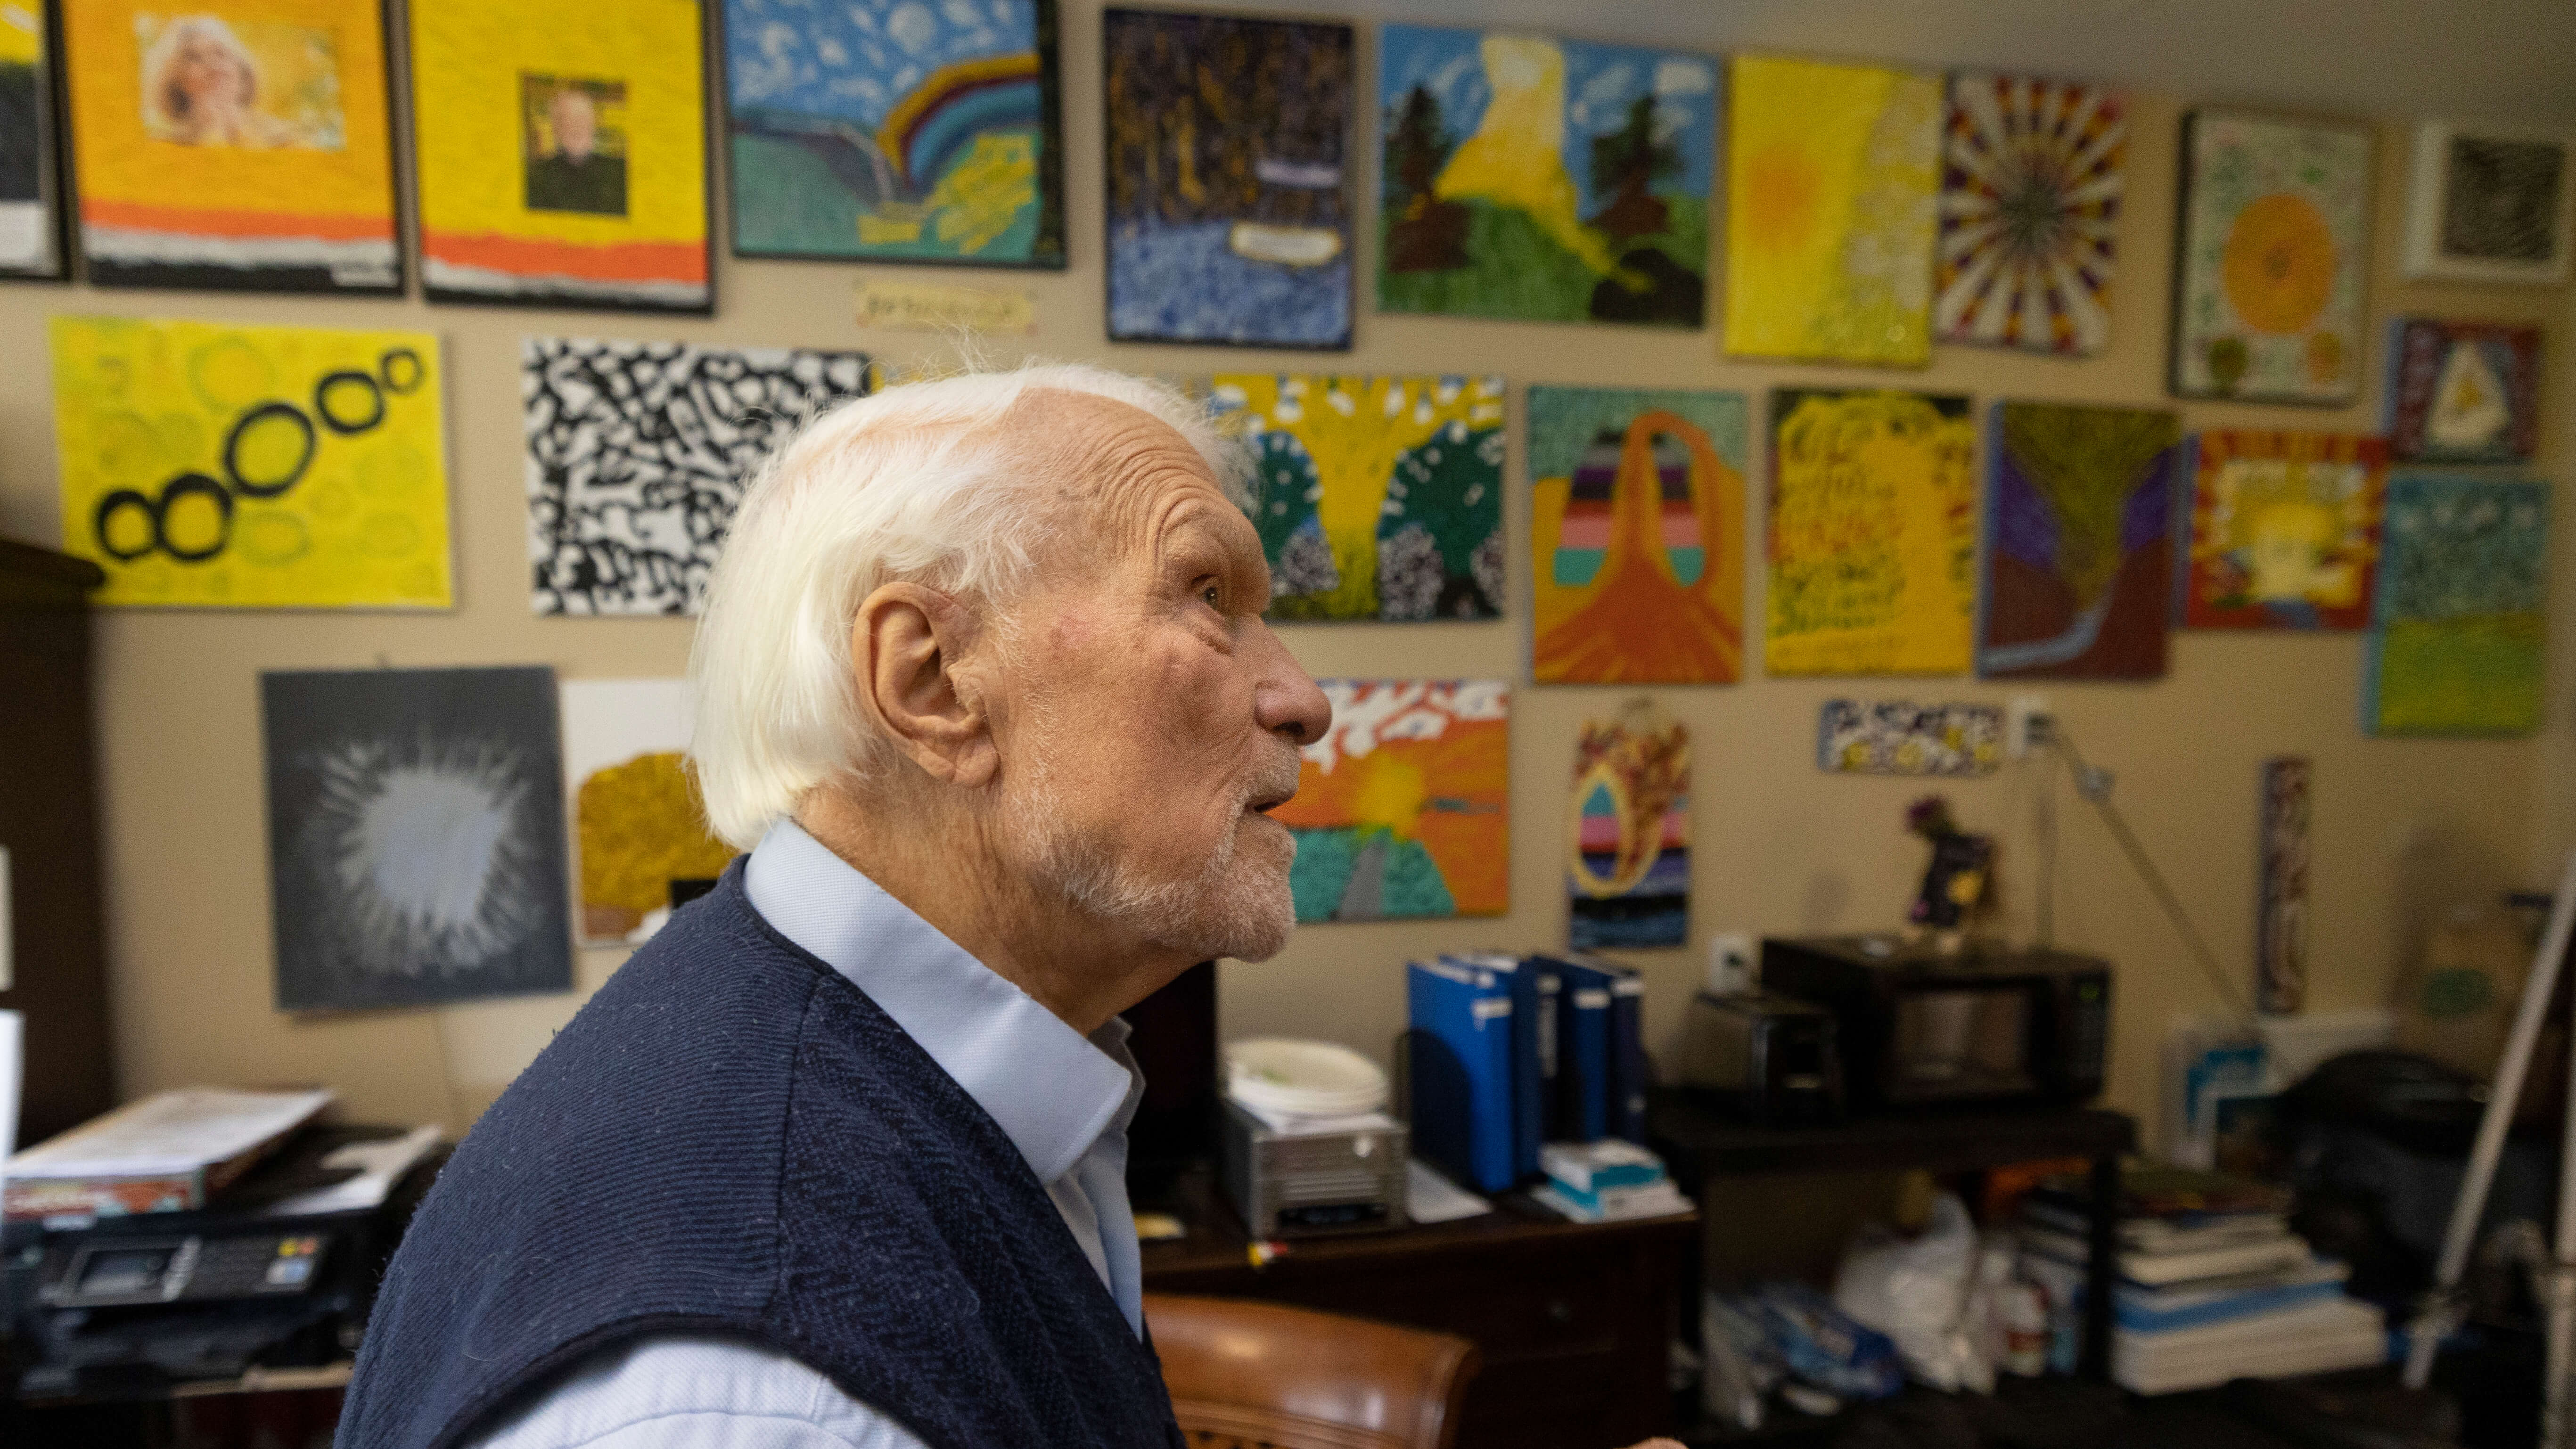 Bob Savage sitting in his home surrounded by paintings he has created